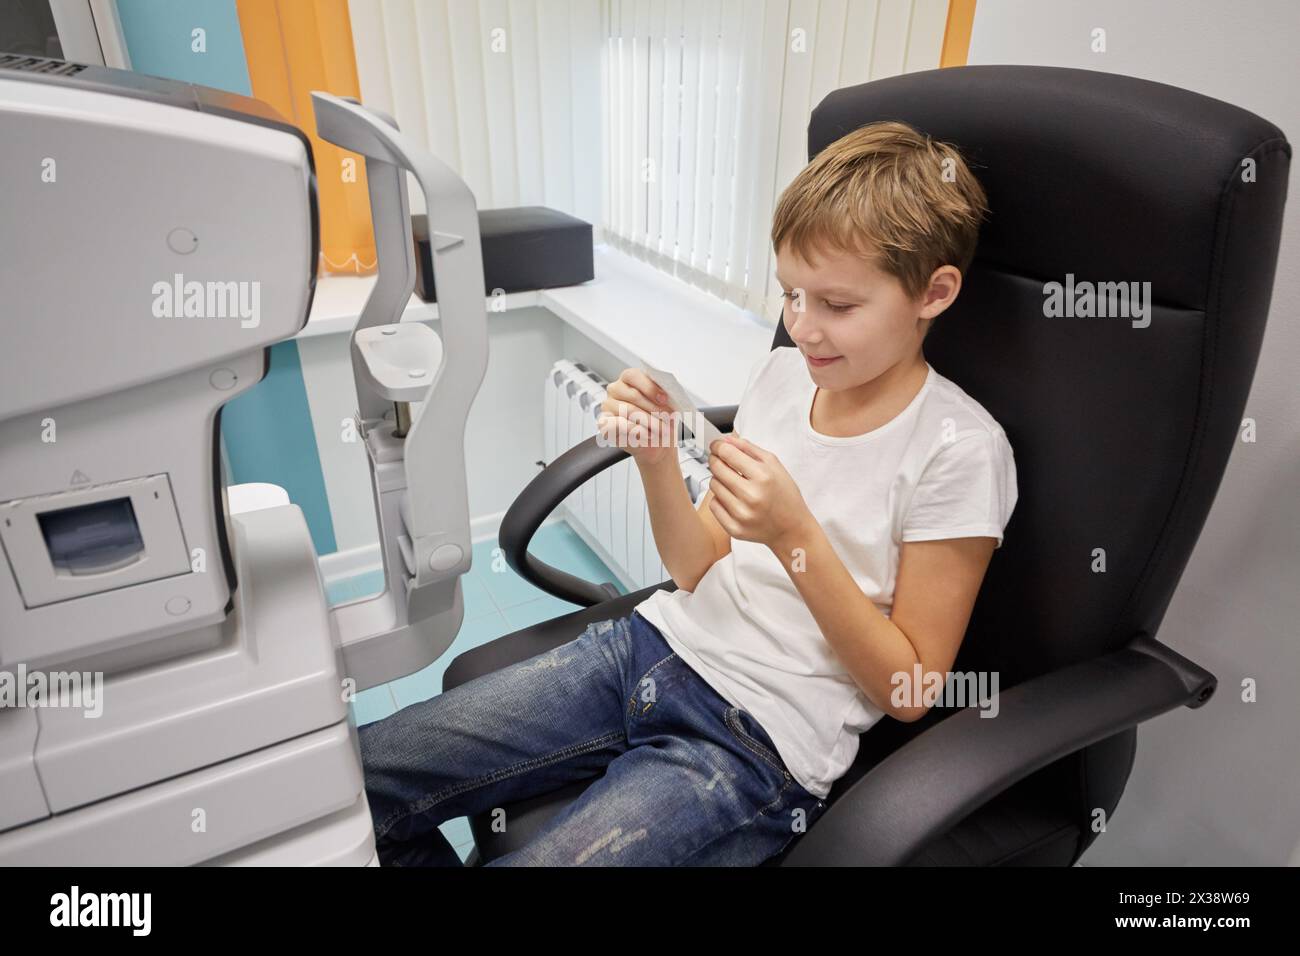 Boy reads results on paper sitting in armchair near keratometer. Stock Photo